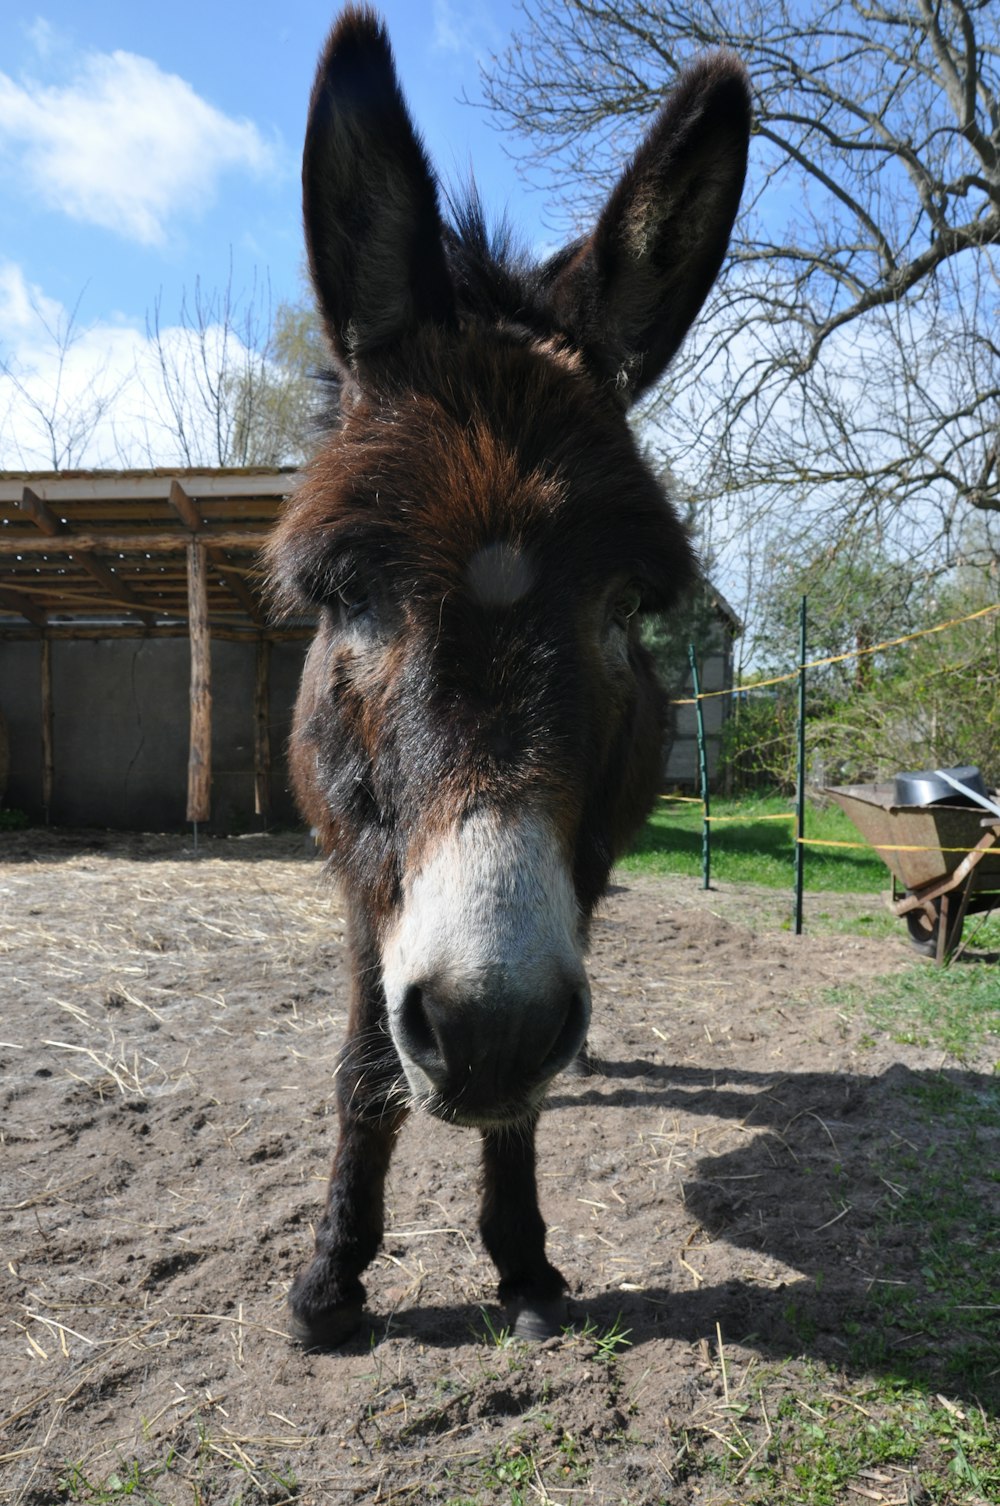 a donkey standing in a fenced in area